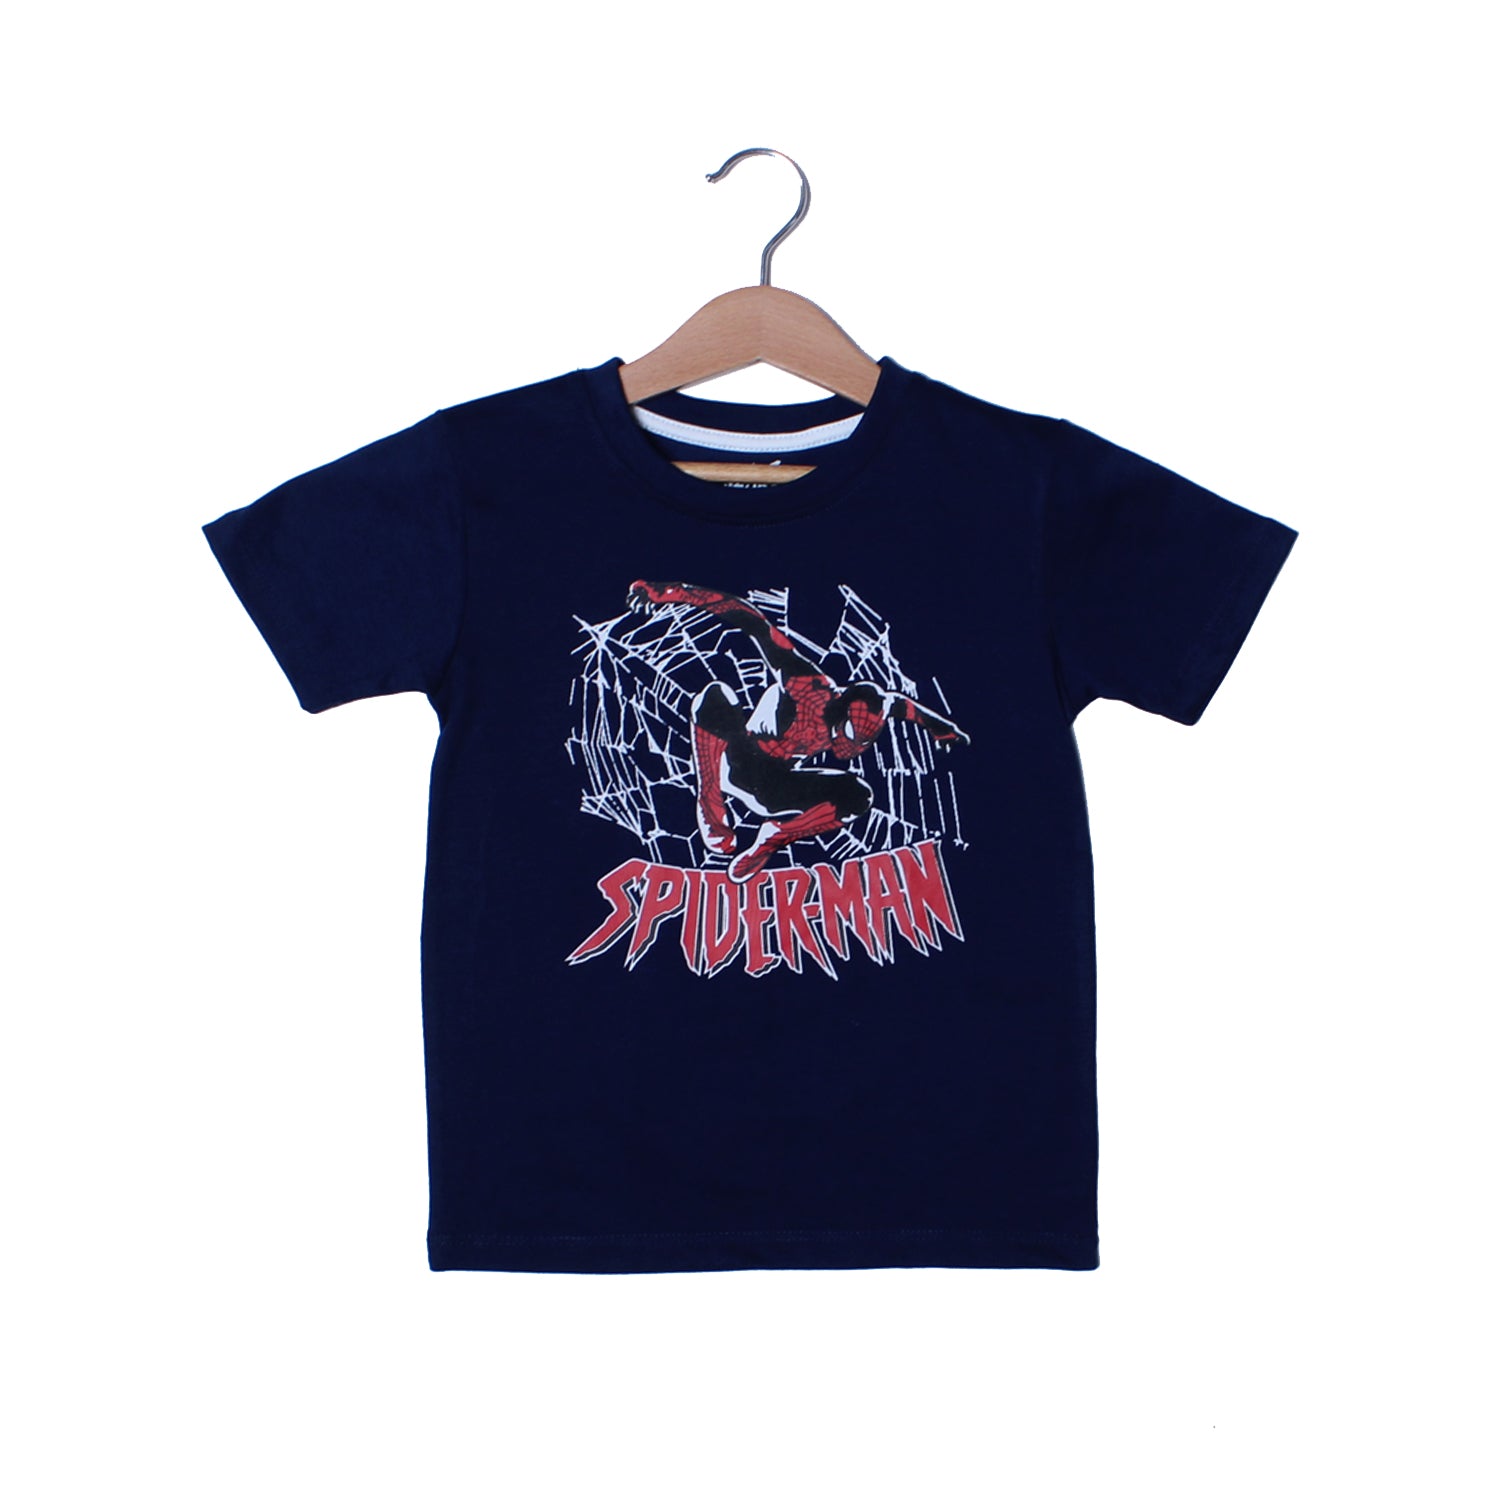 NEW NAVY BLUE SPIDER-MAN PRINTED T-SHIRT FOR BOYS